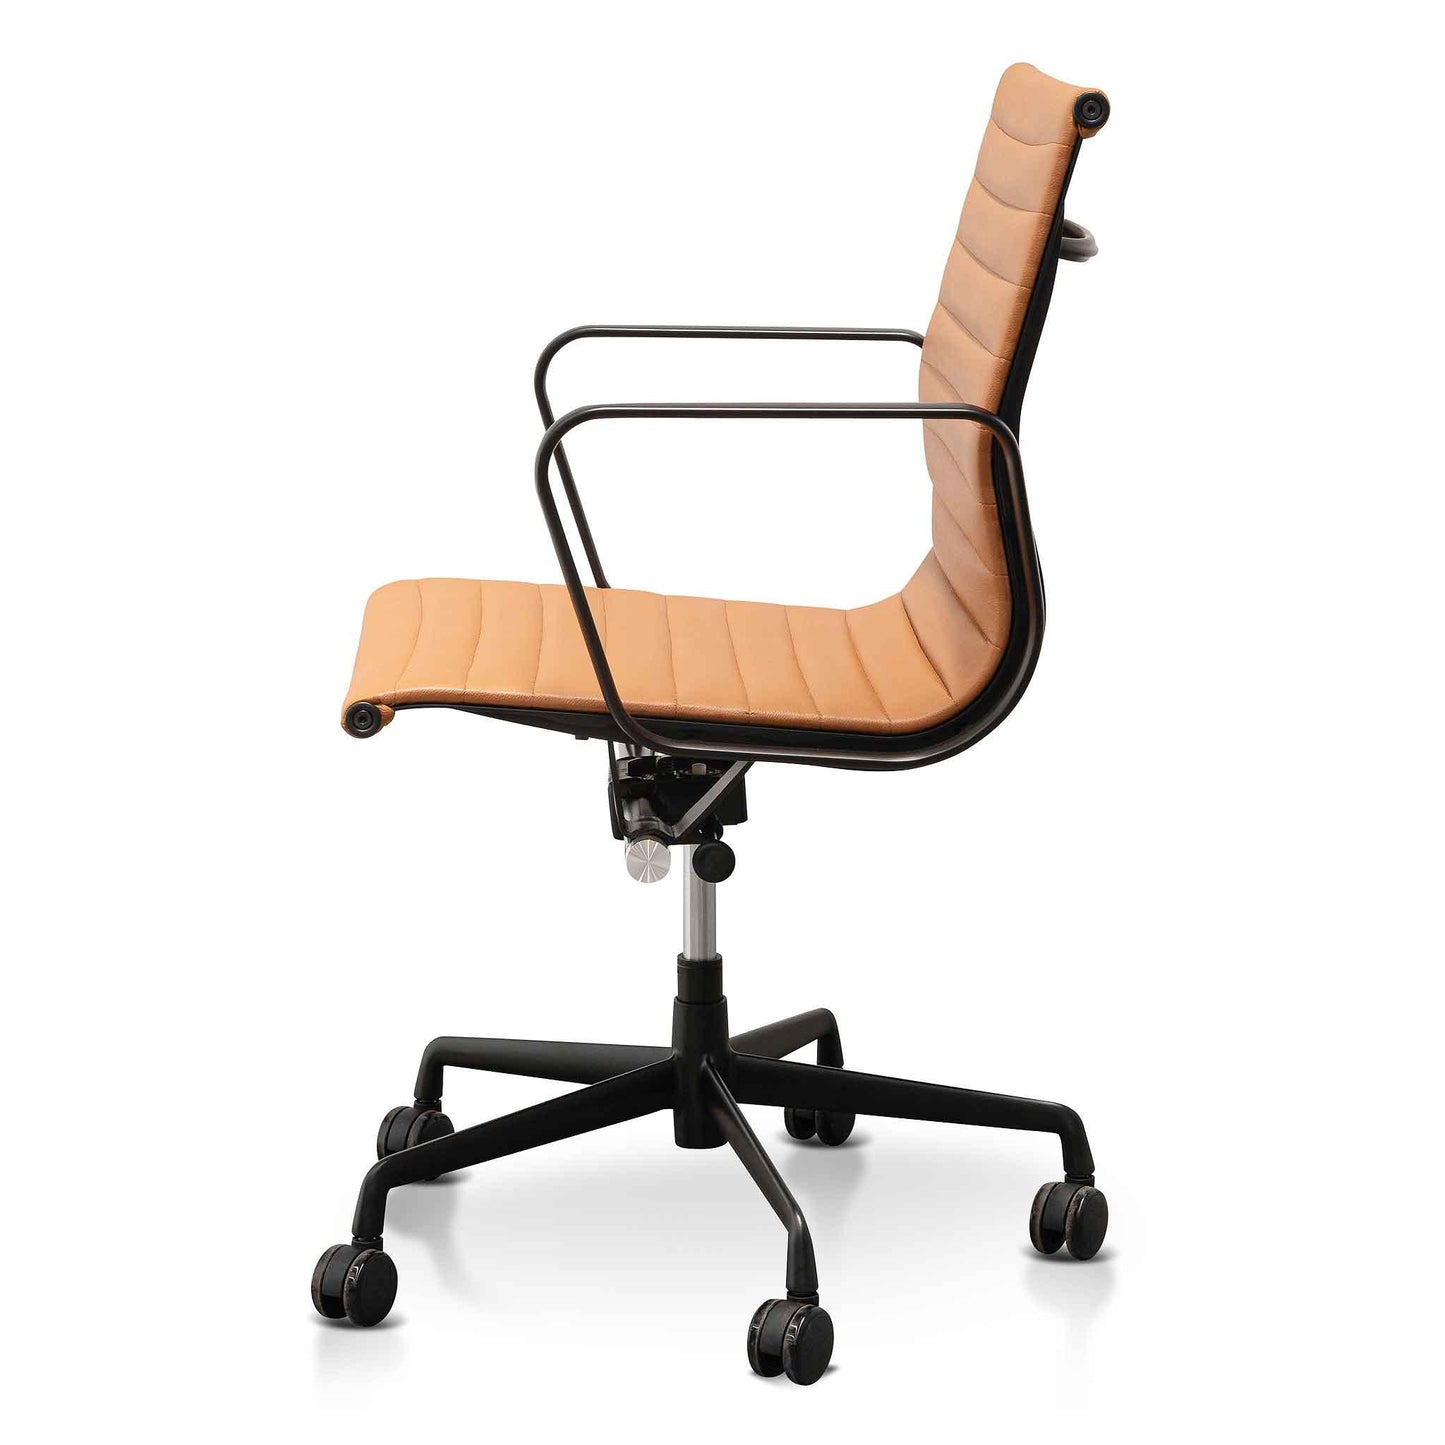 Calibre Low Back Office Chair - Saddle Tan in Black Frame OC6403-YS-Office/Gaming Chairs-Calibre-Prime Furniture